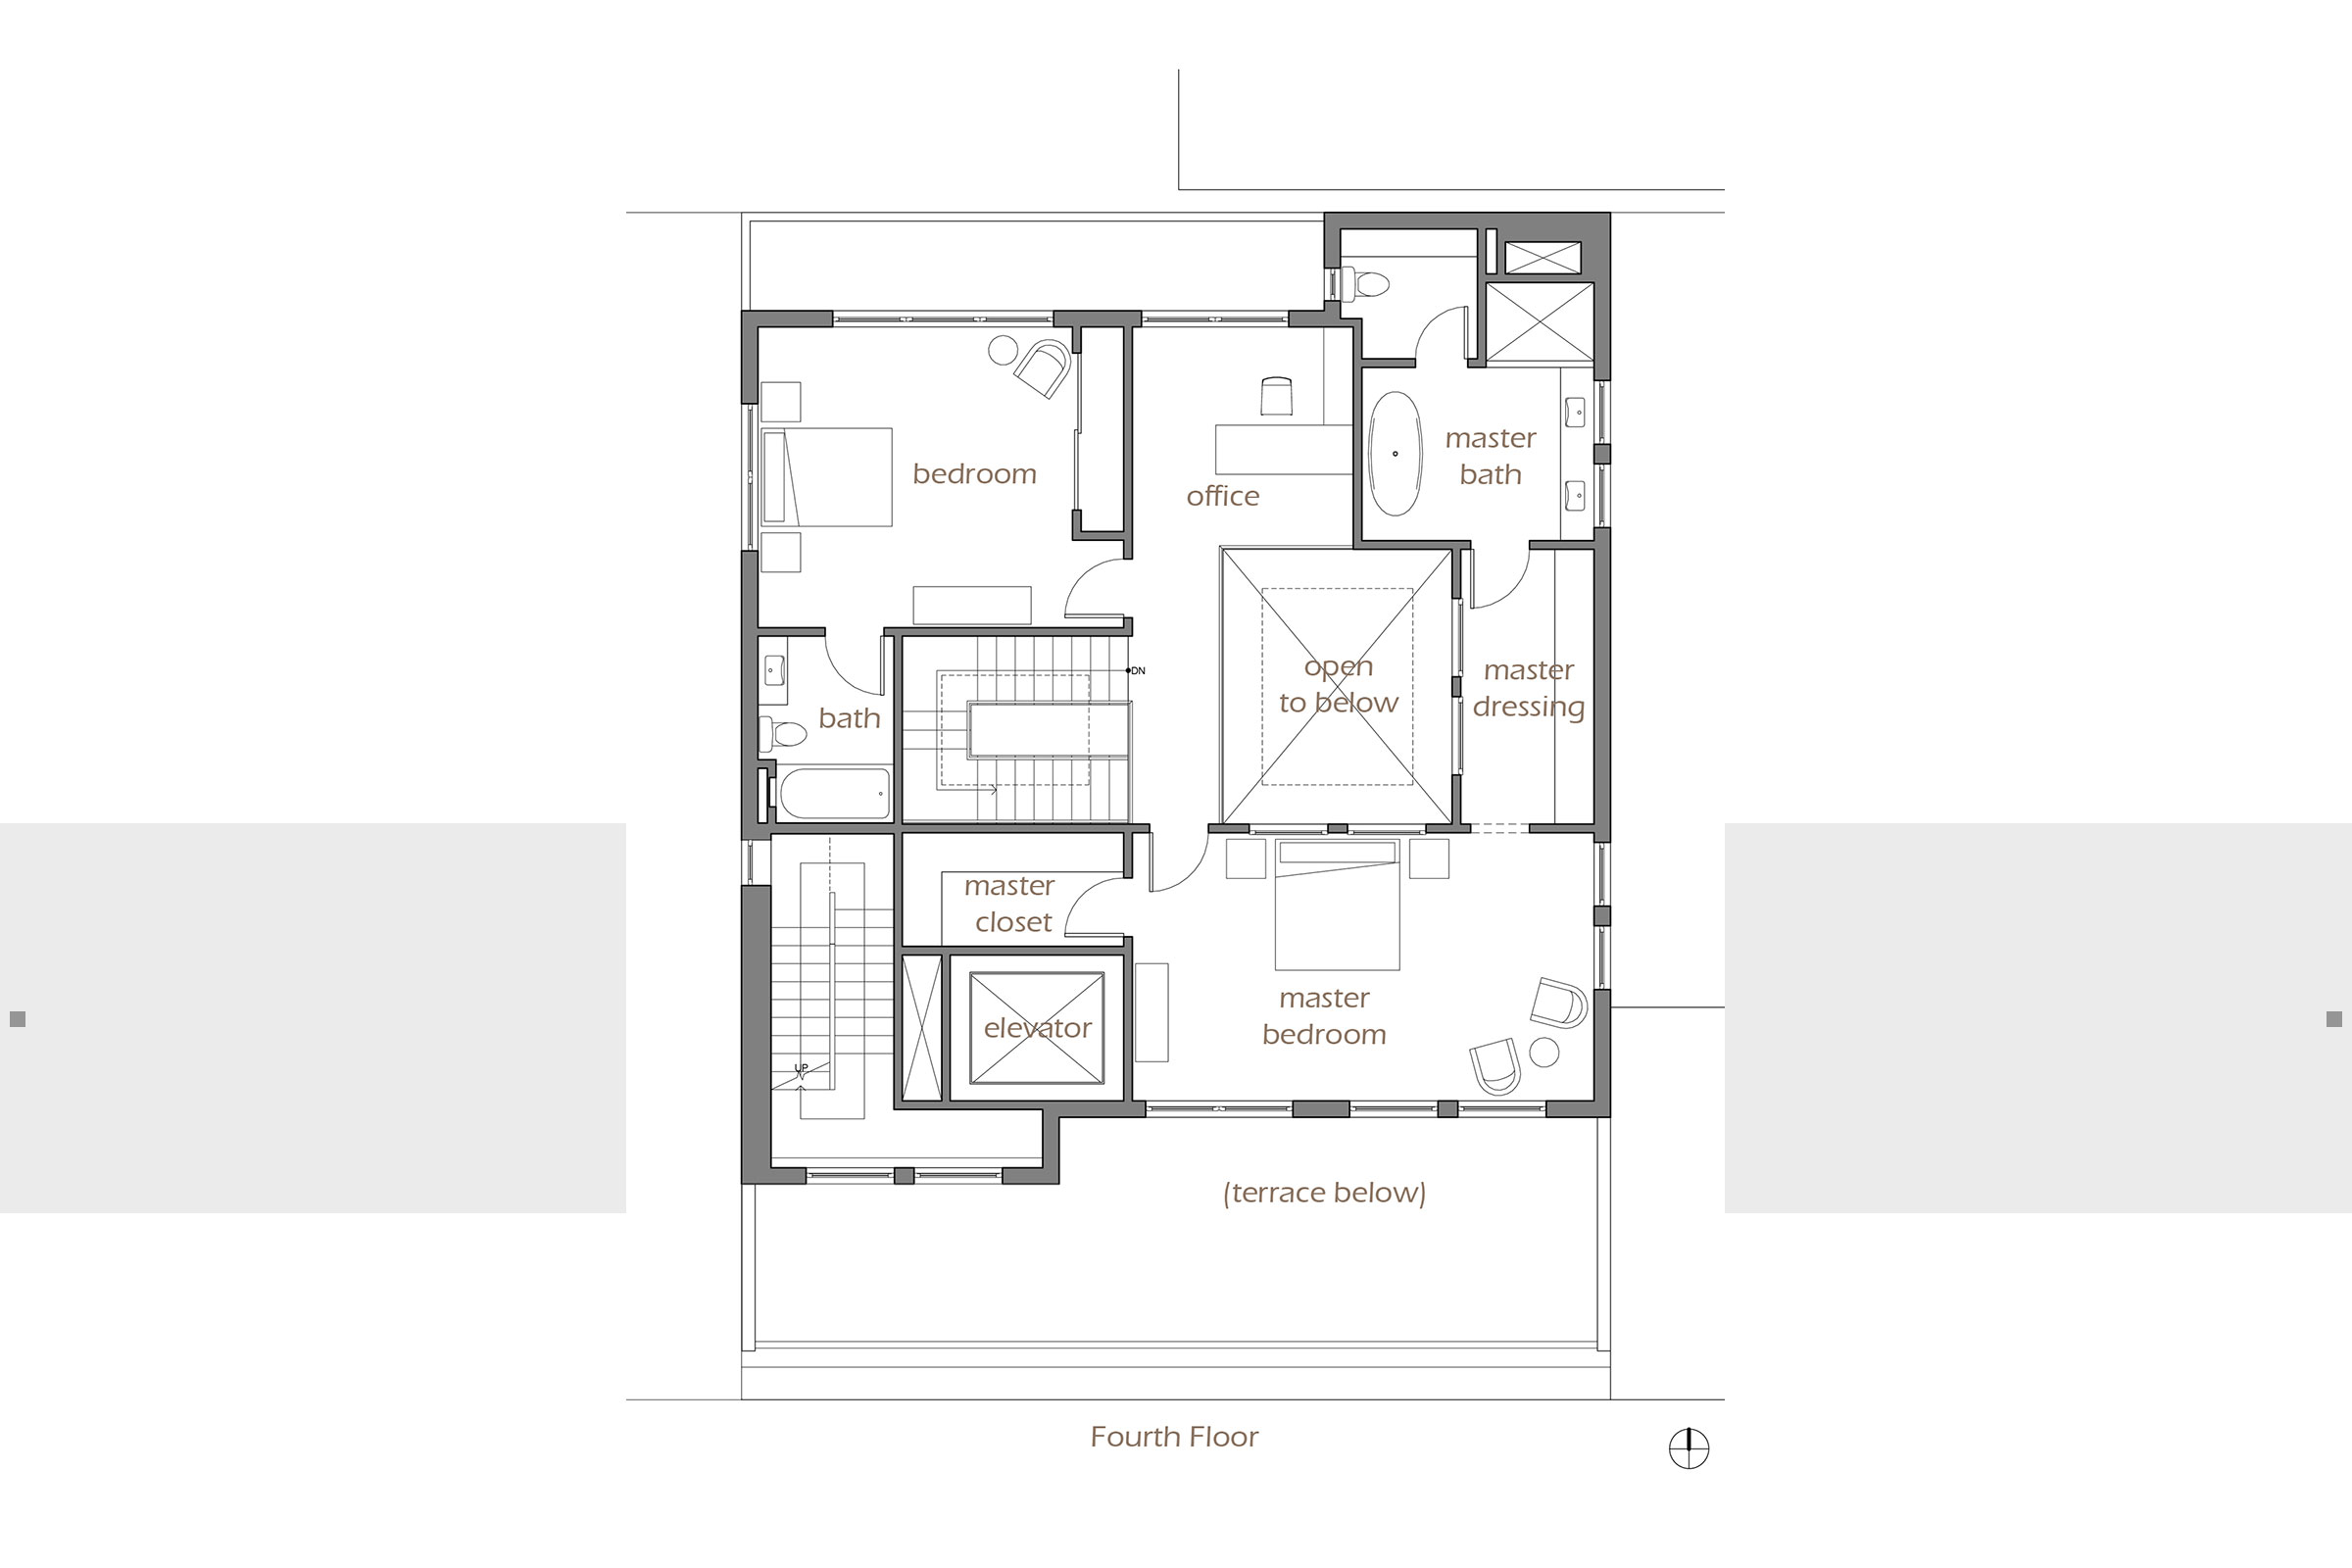 blueprint layout of fourth floor of residence